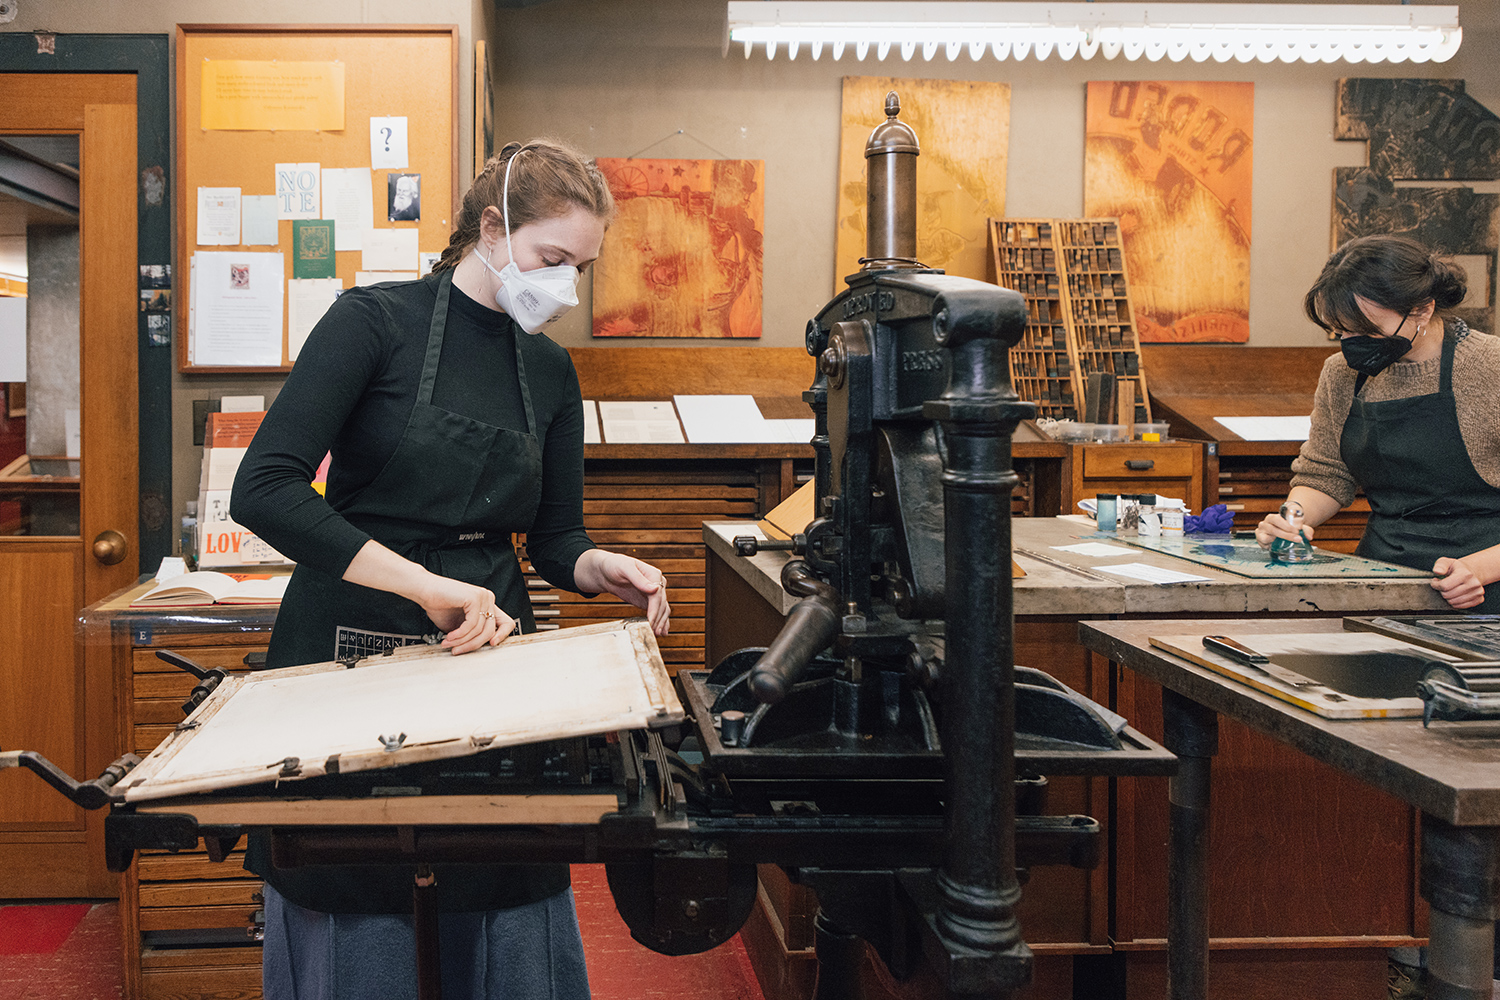 A woman covers a tray of type as she prepares to use a 19th century iron hand press. Another woman in the background works at a desk, making her own green ink.